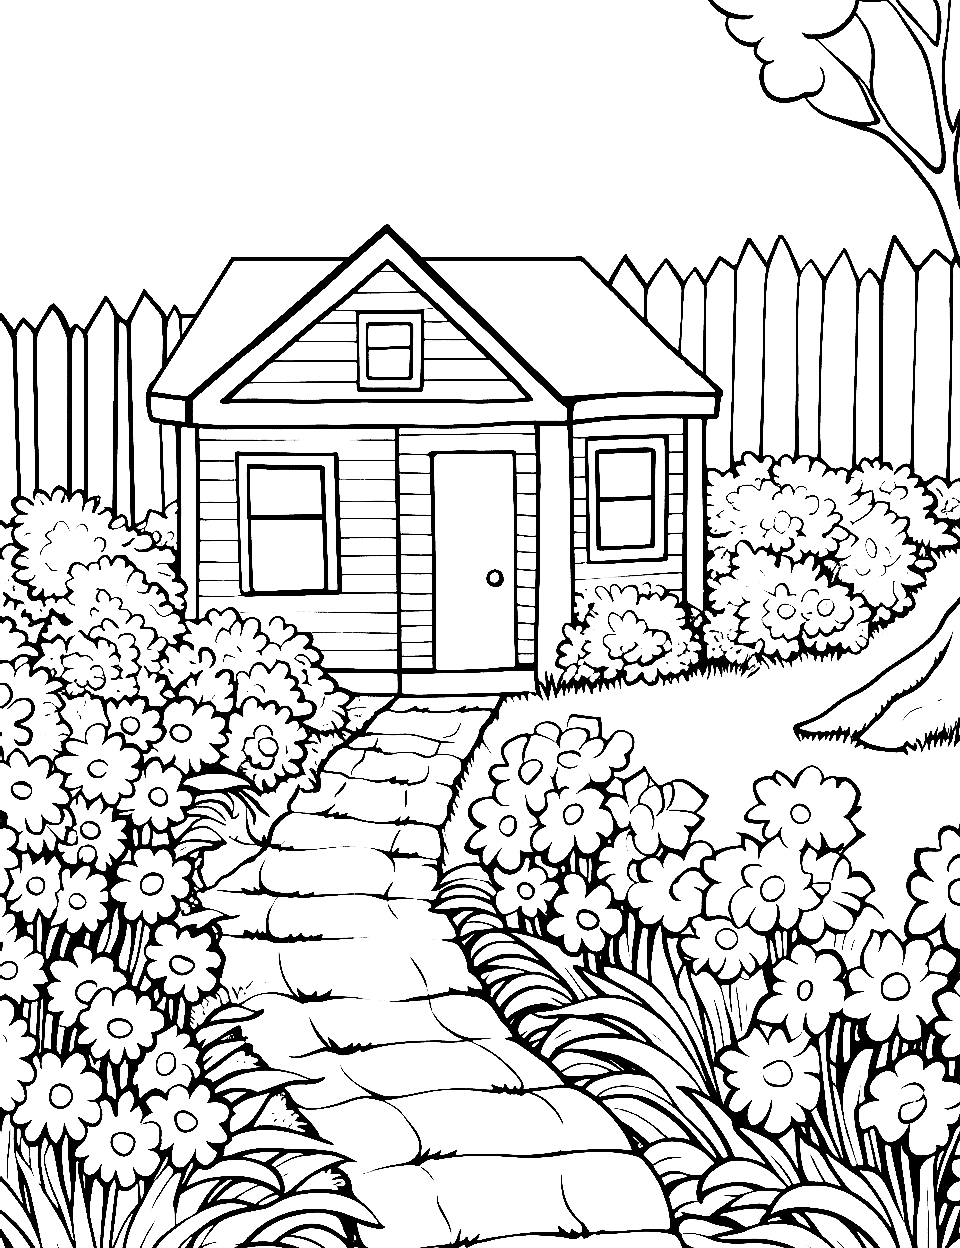 Bountiful Garden Path Coloring Page - A family house with a vibrant garden.